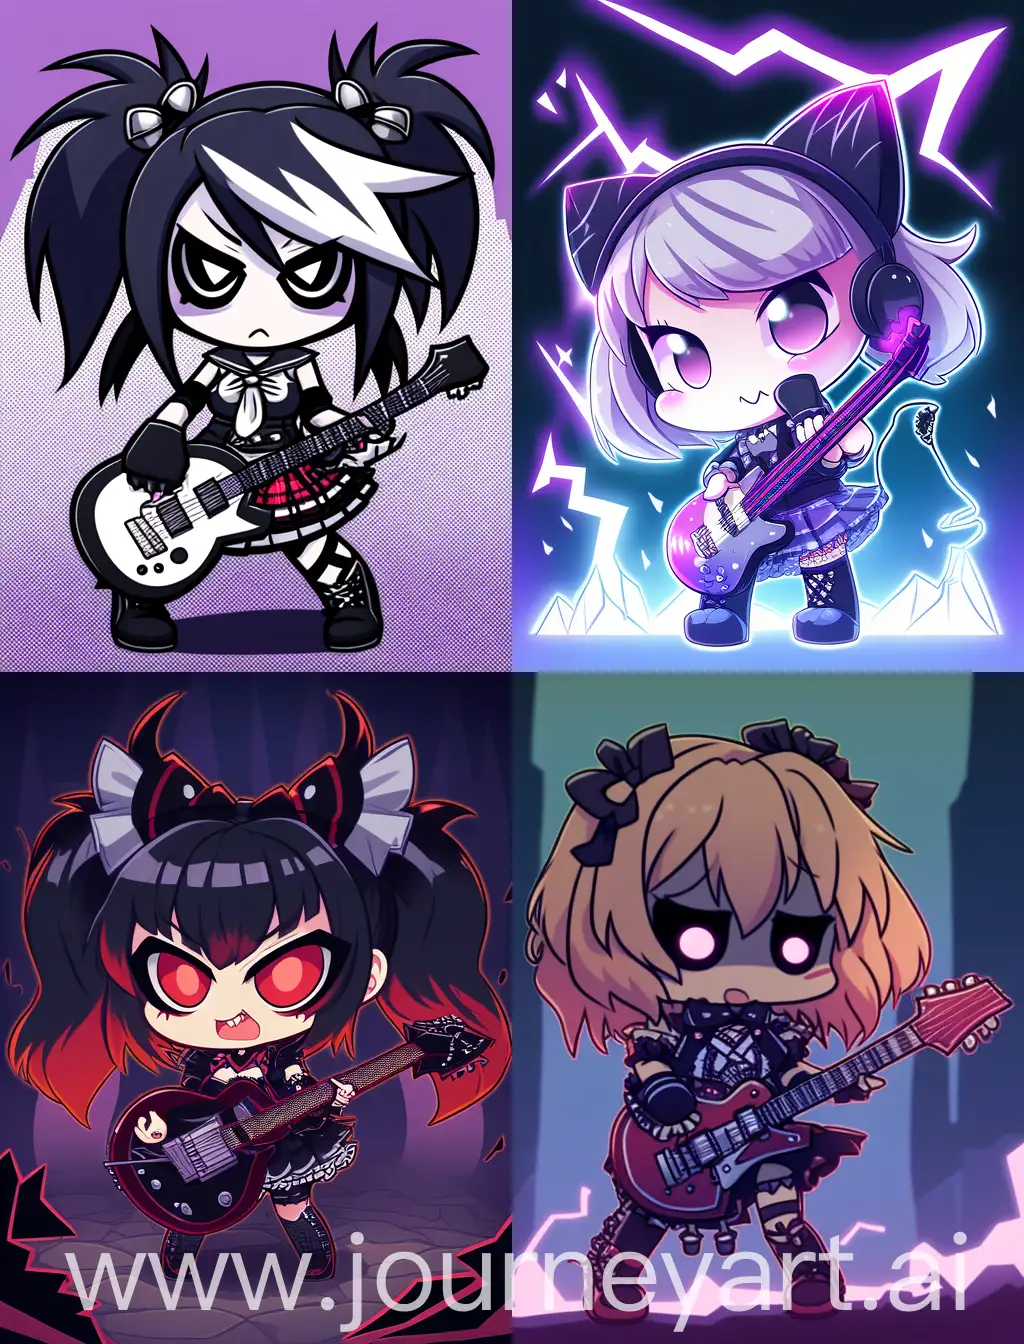 chibi emo girl playing guitar, cartoon anime style, strong lines, spooky background